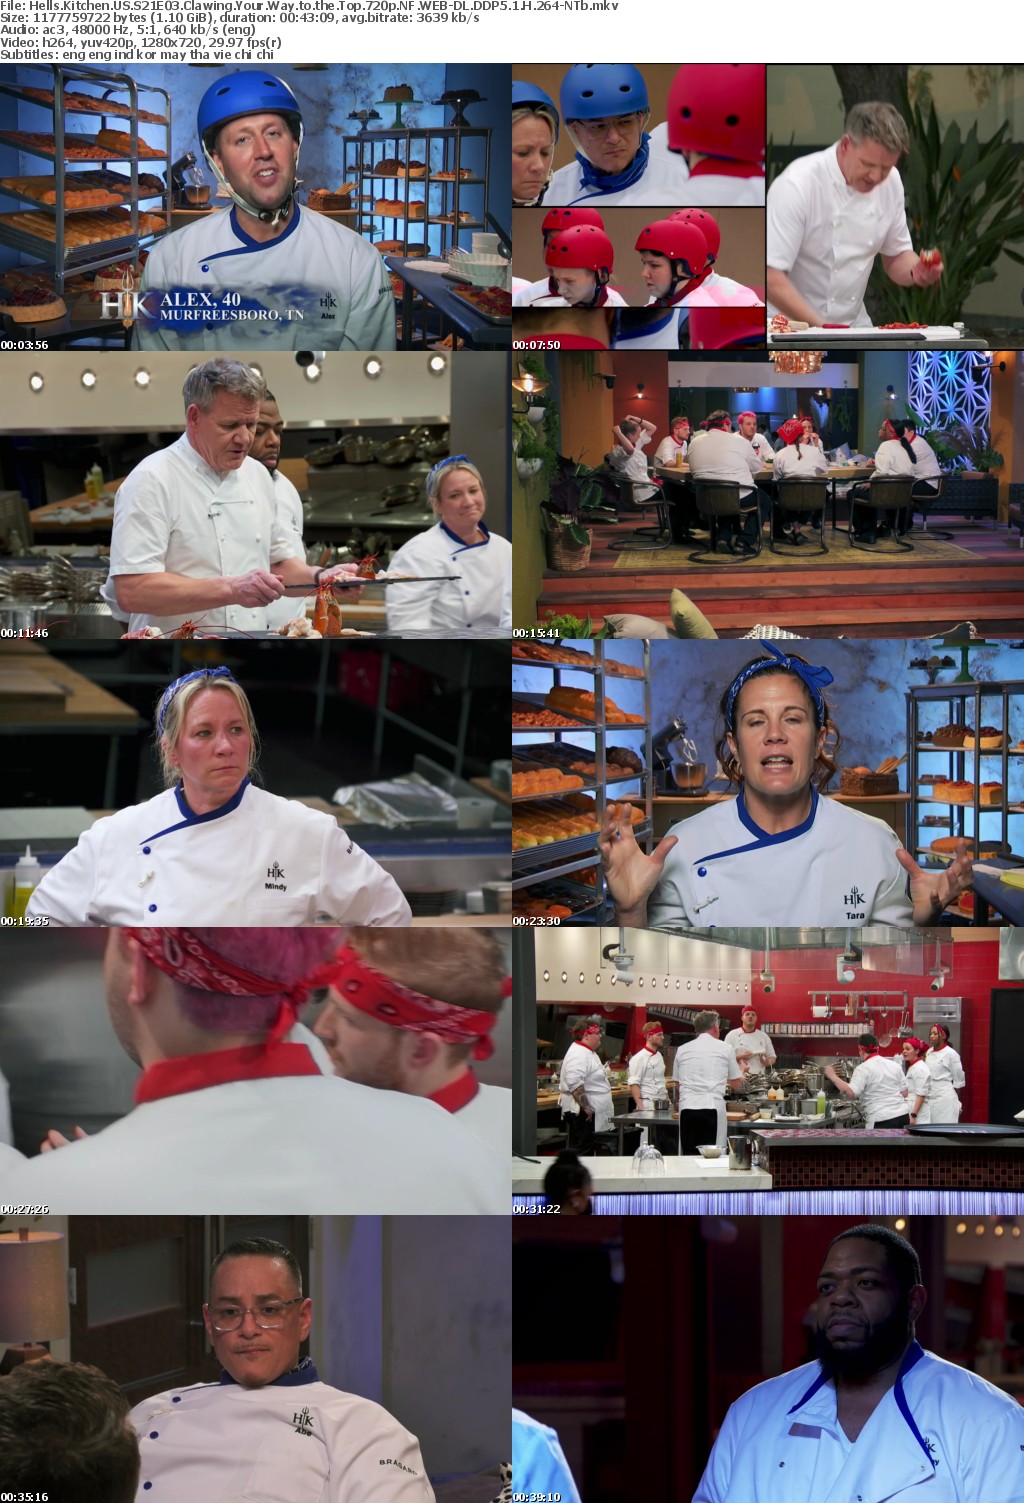 Hells Kitchen US S21E03 Clawing Your Way to the Top 720p NF WEBRip DDP5 1 x264-NTb